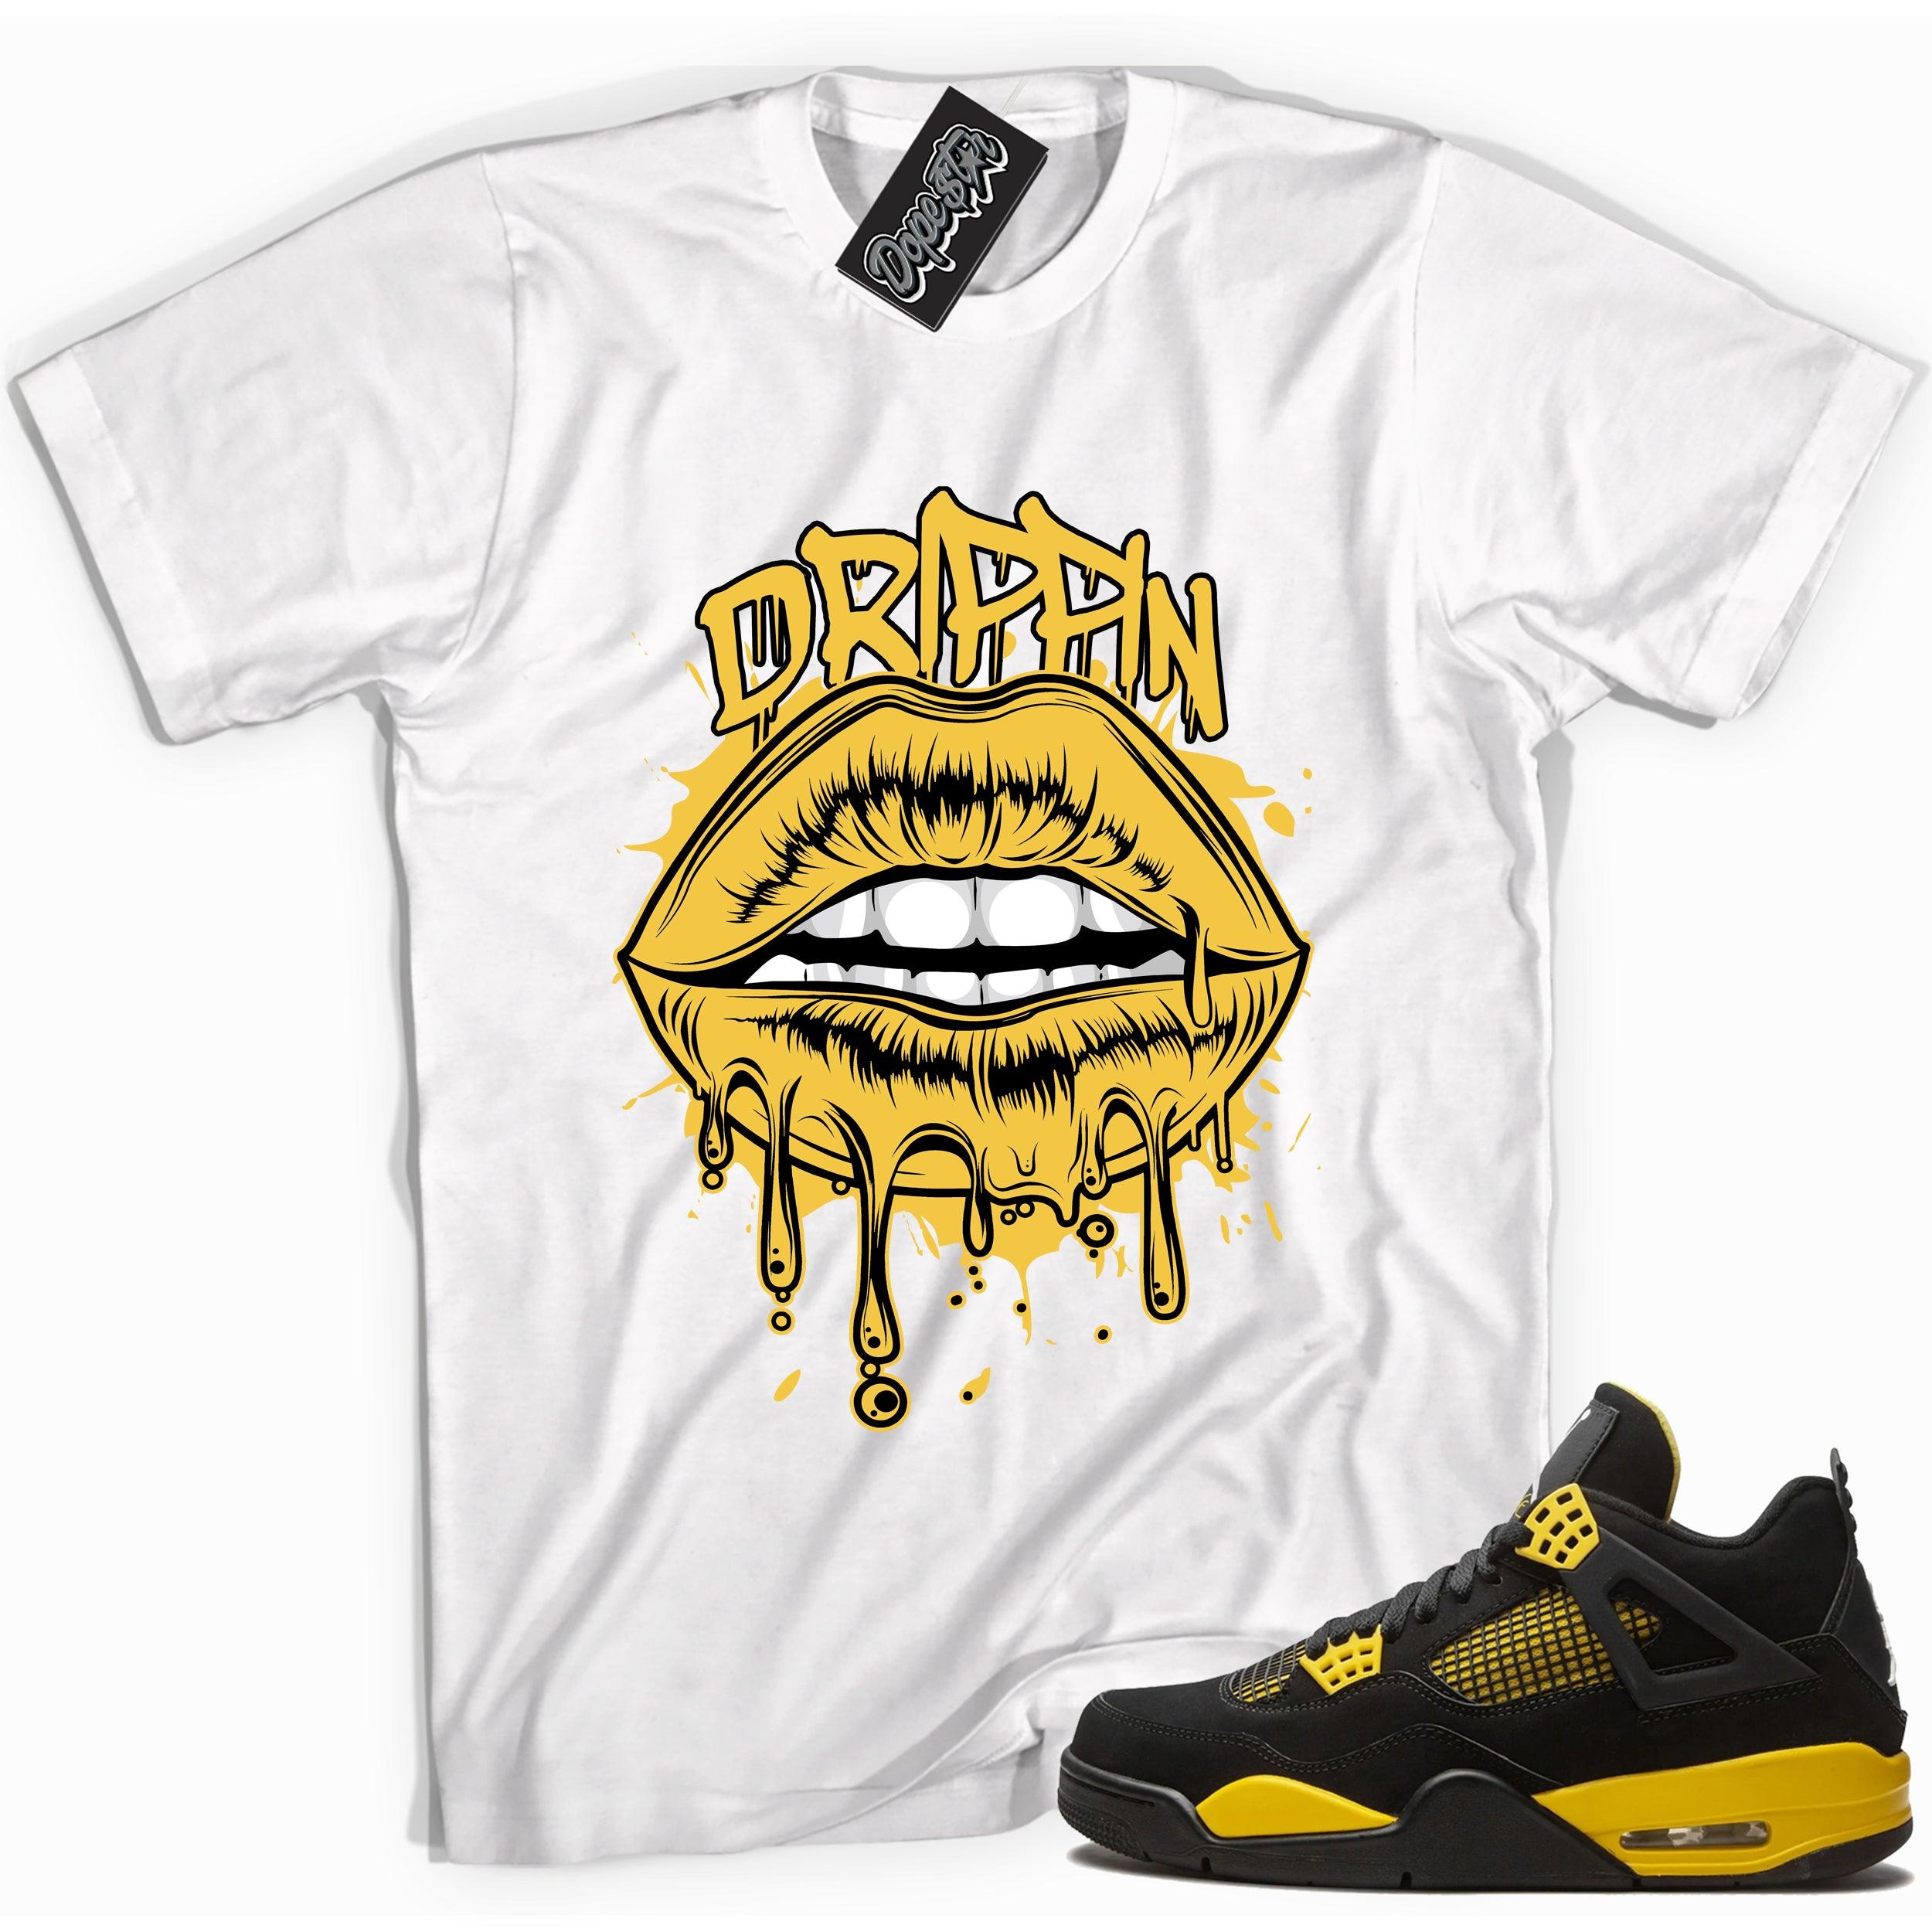 Cool white graphic tee with 'drippin' print, that perfectly matches Air Jordan 4 Thunder sneakers